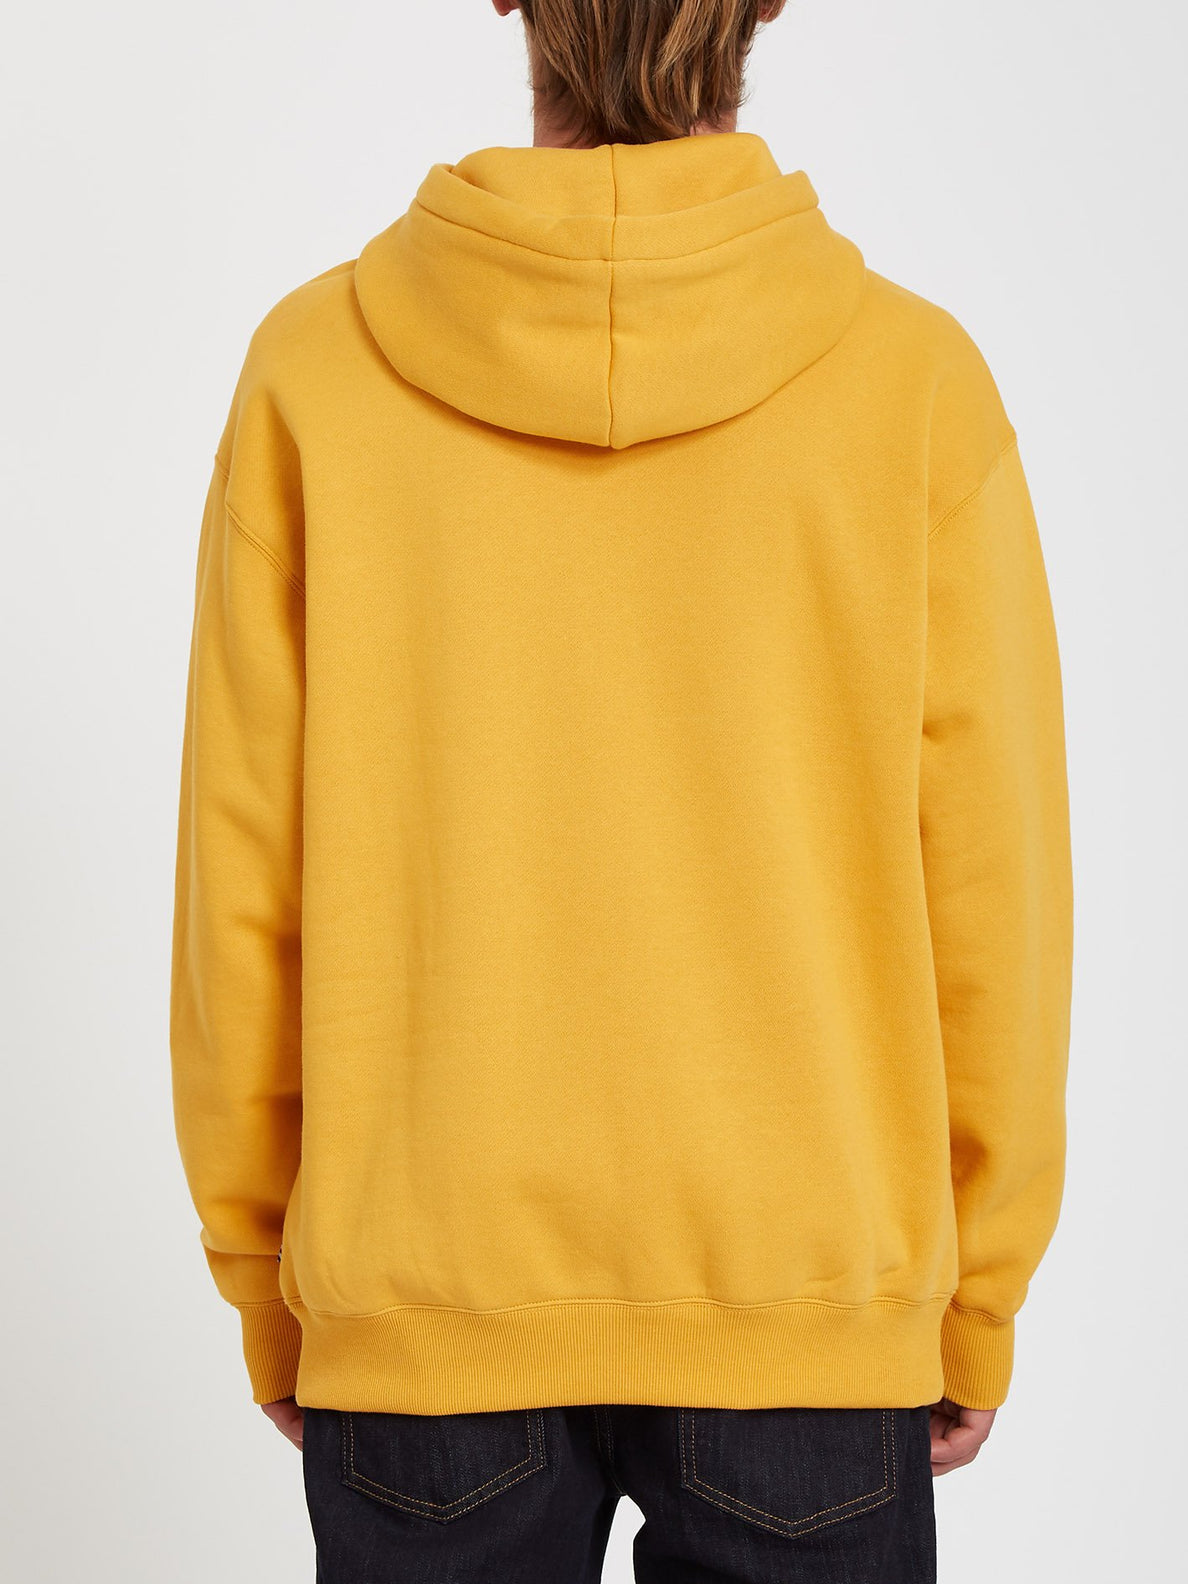 Erith Hoodie - VINTAGE GOLD (A4112110_VGD) [B]